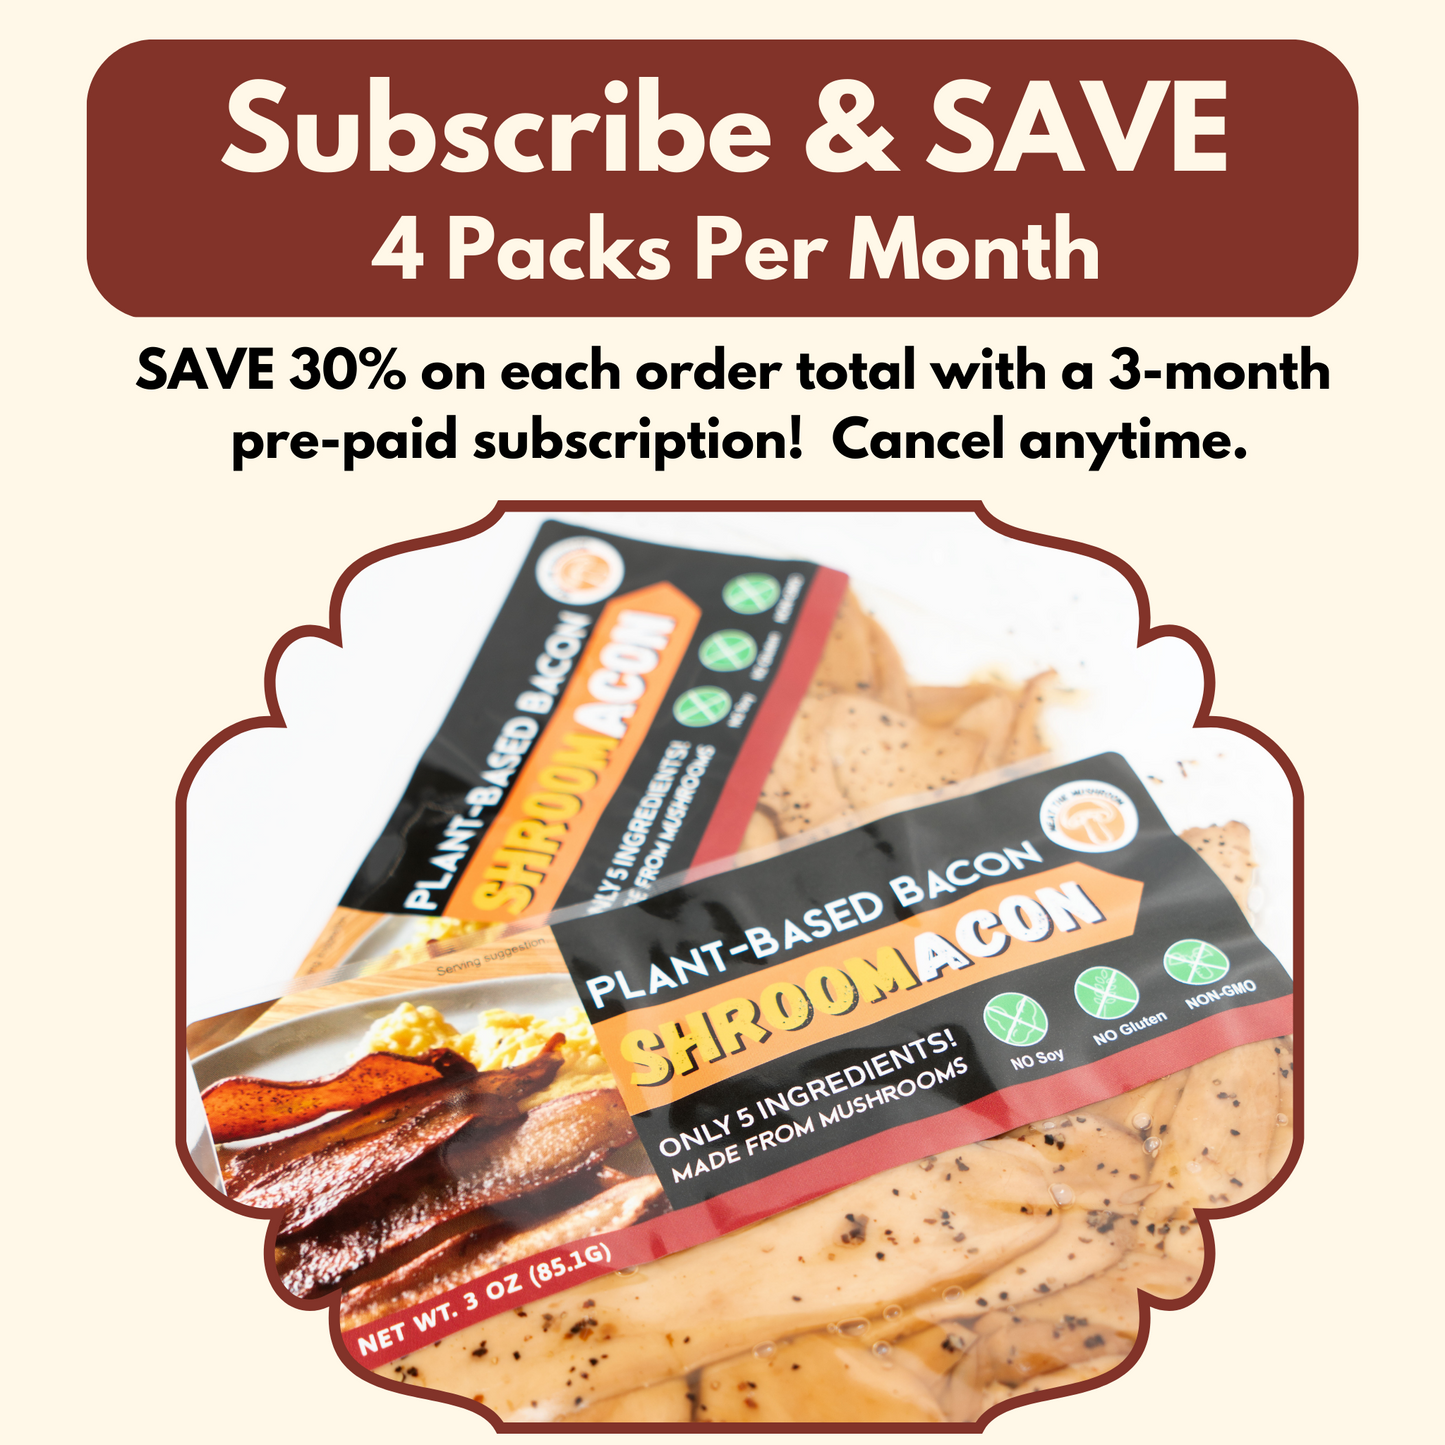 SHROOMACON - Subscribe & SAVE: 4 Packs Per Month